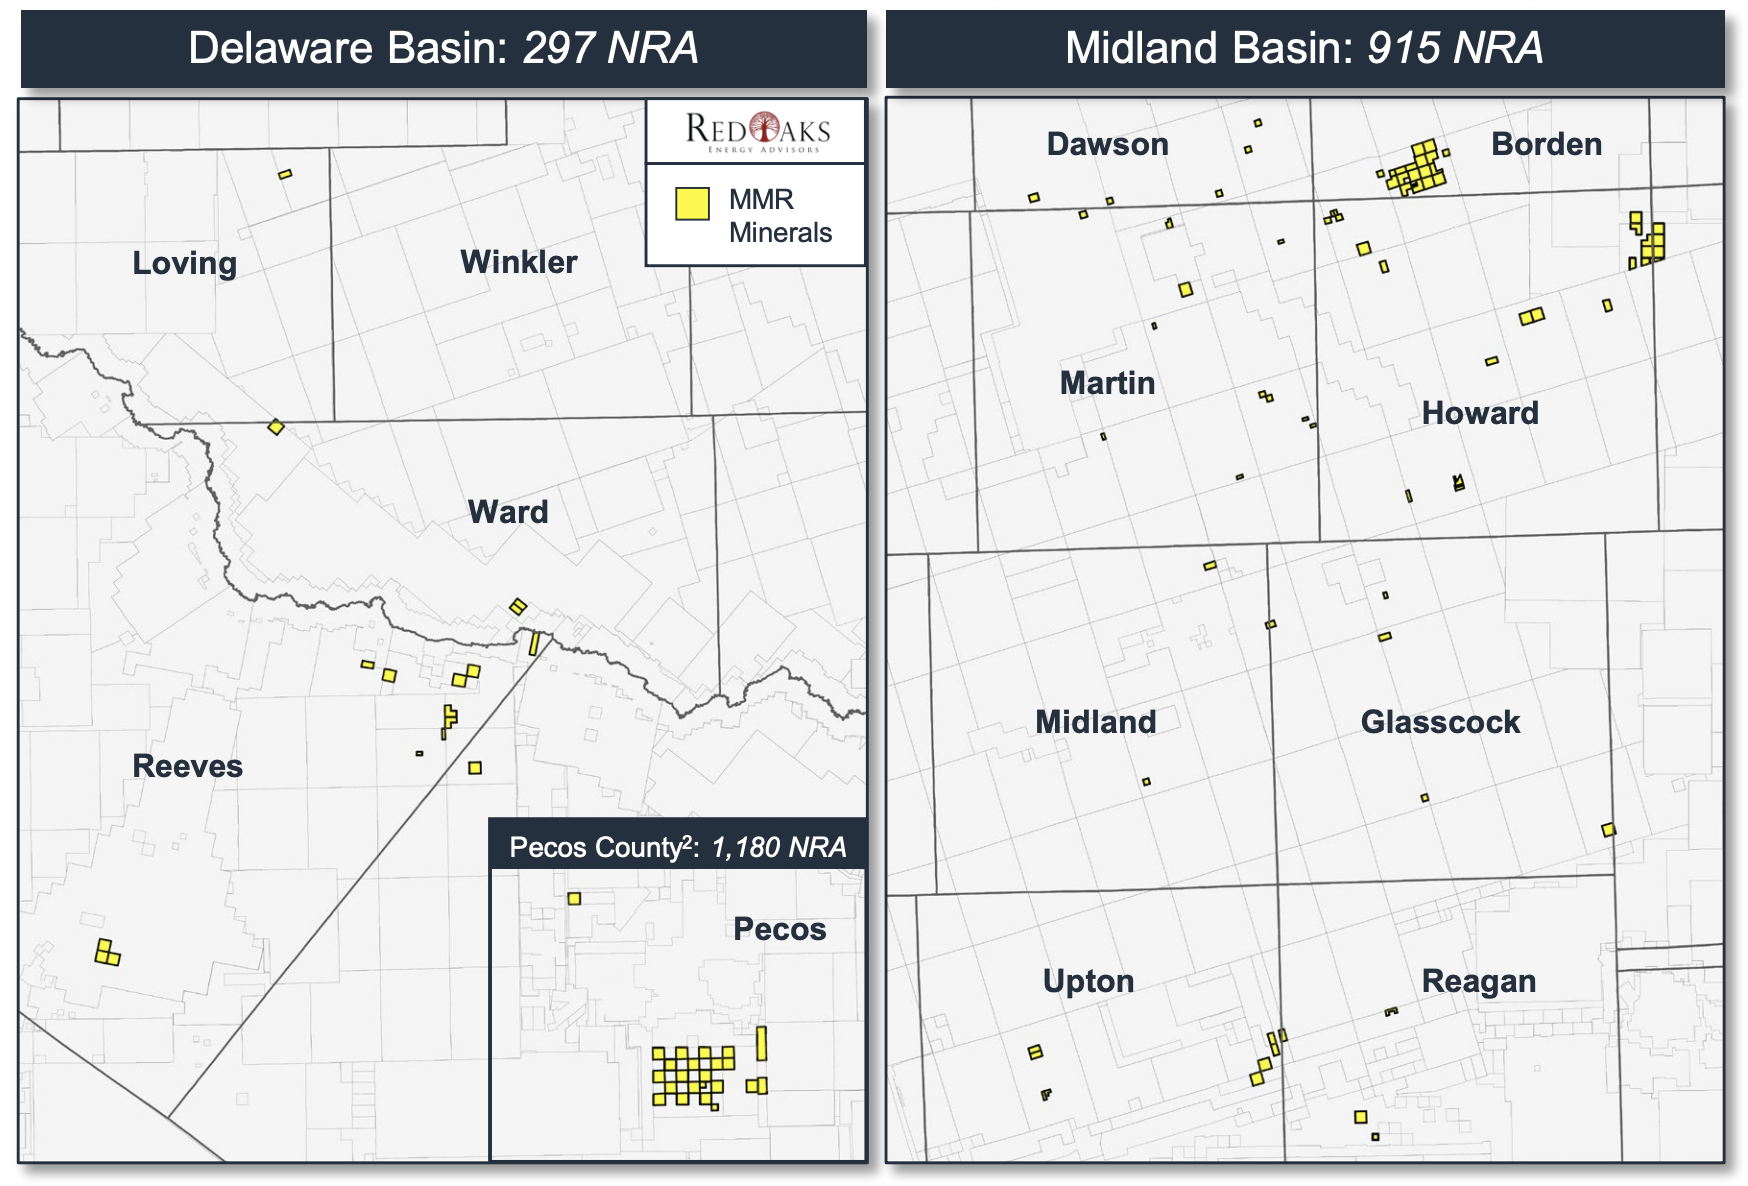 Marketed: Midland, Delaware Basin Mineral Properties